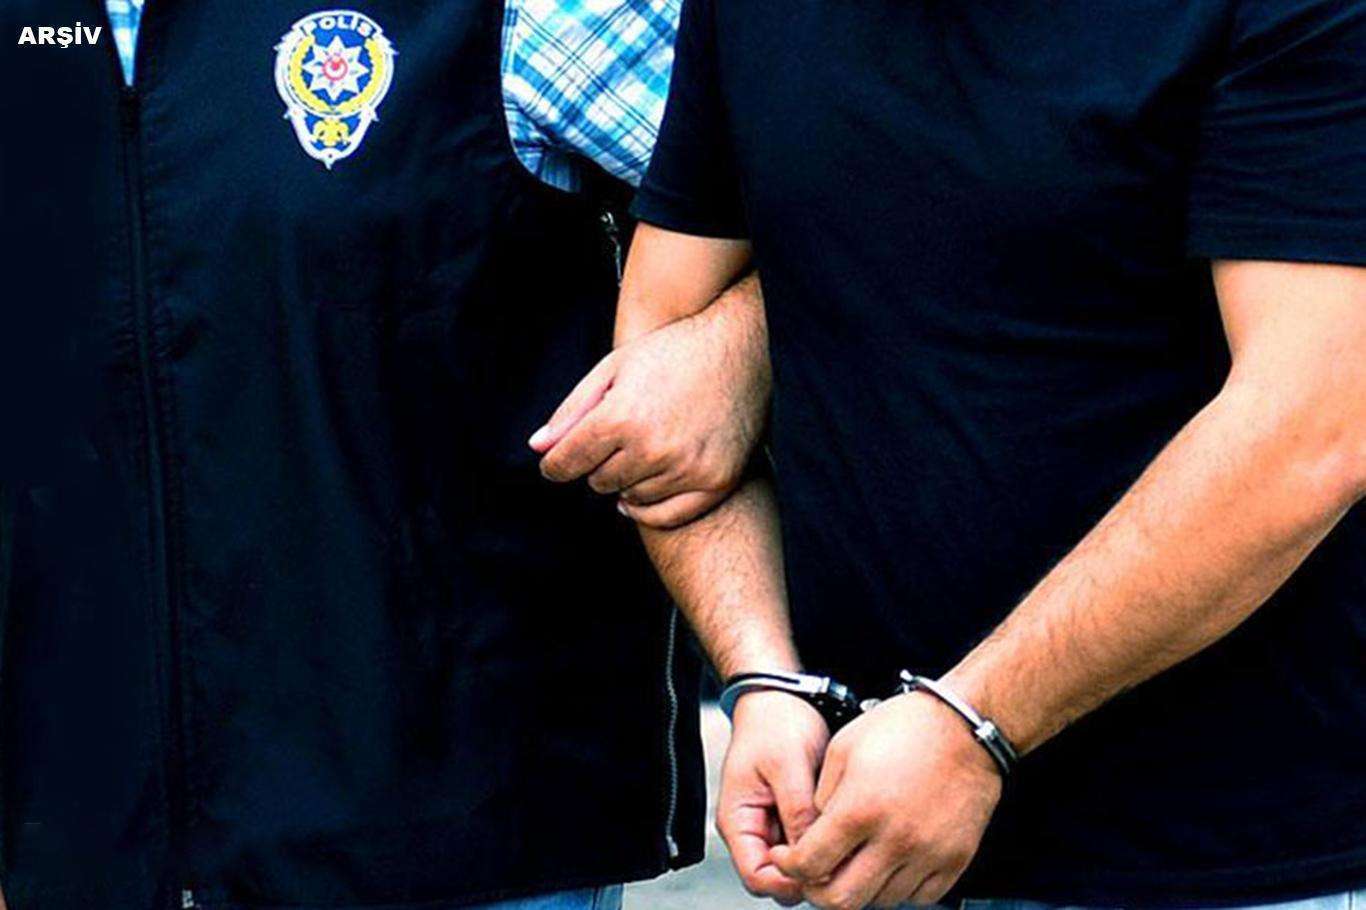 Turkish police detain 14 FETO-linked suspects in Gaziantep-based operation